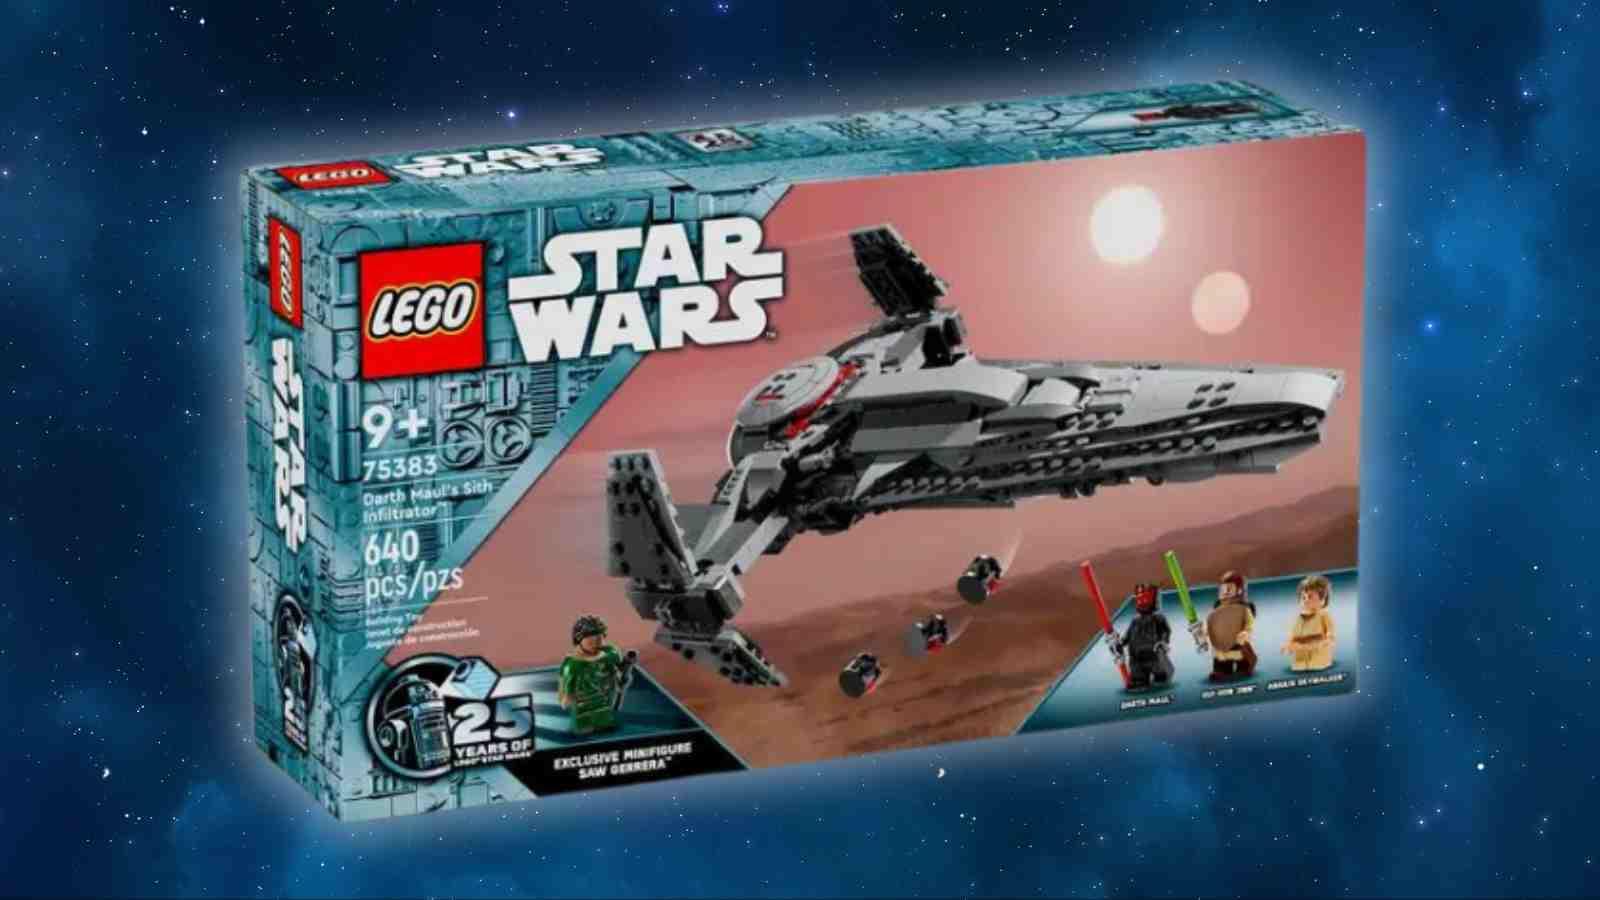 The LEGO Star Wars Darth Maul’s Sith Infiltrator on a galaxy background